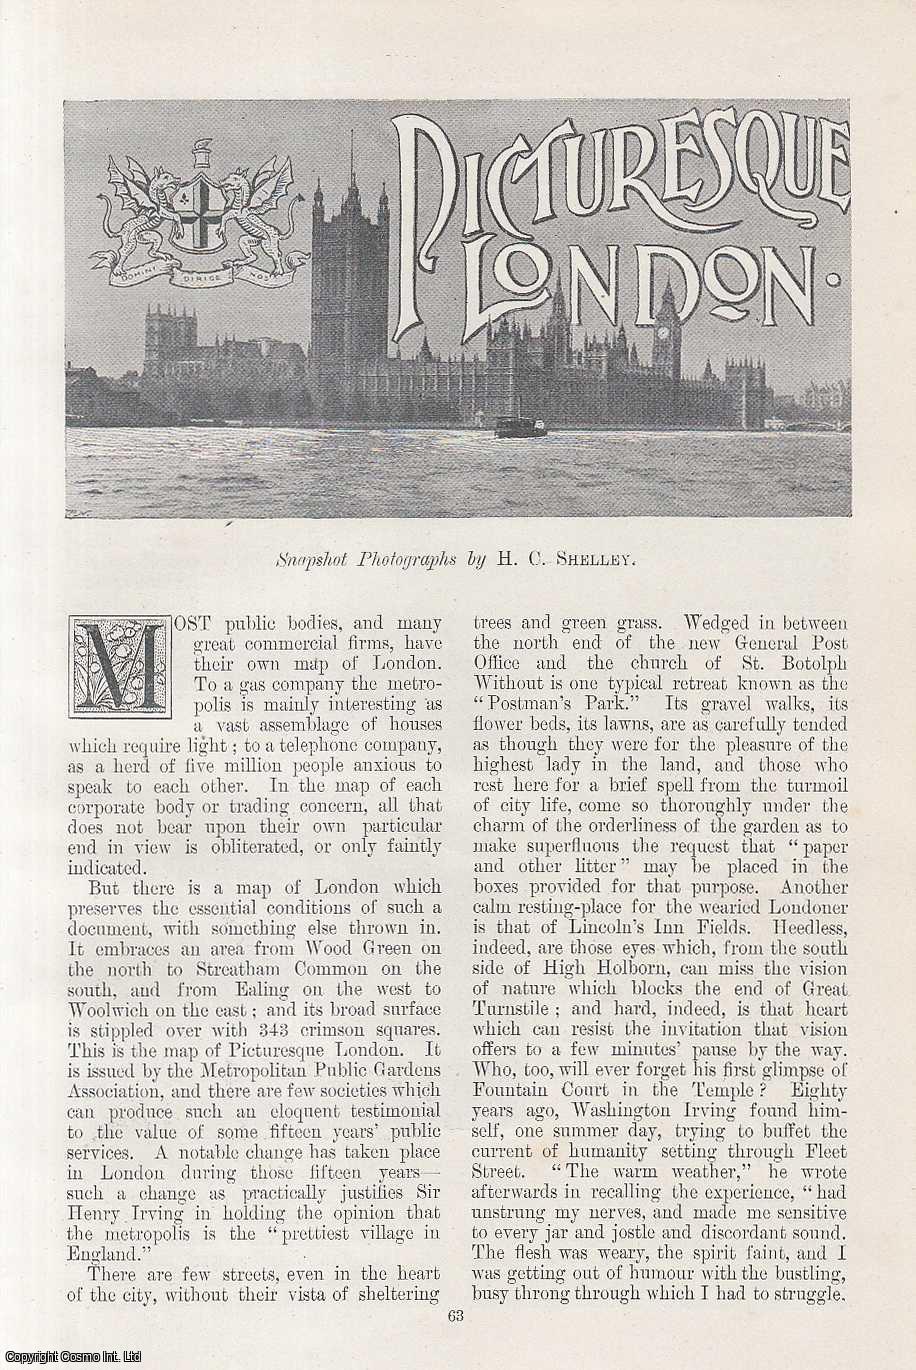 No Author Stated - Picturesque London. An original article from the Windsor Magazine, 1898.